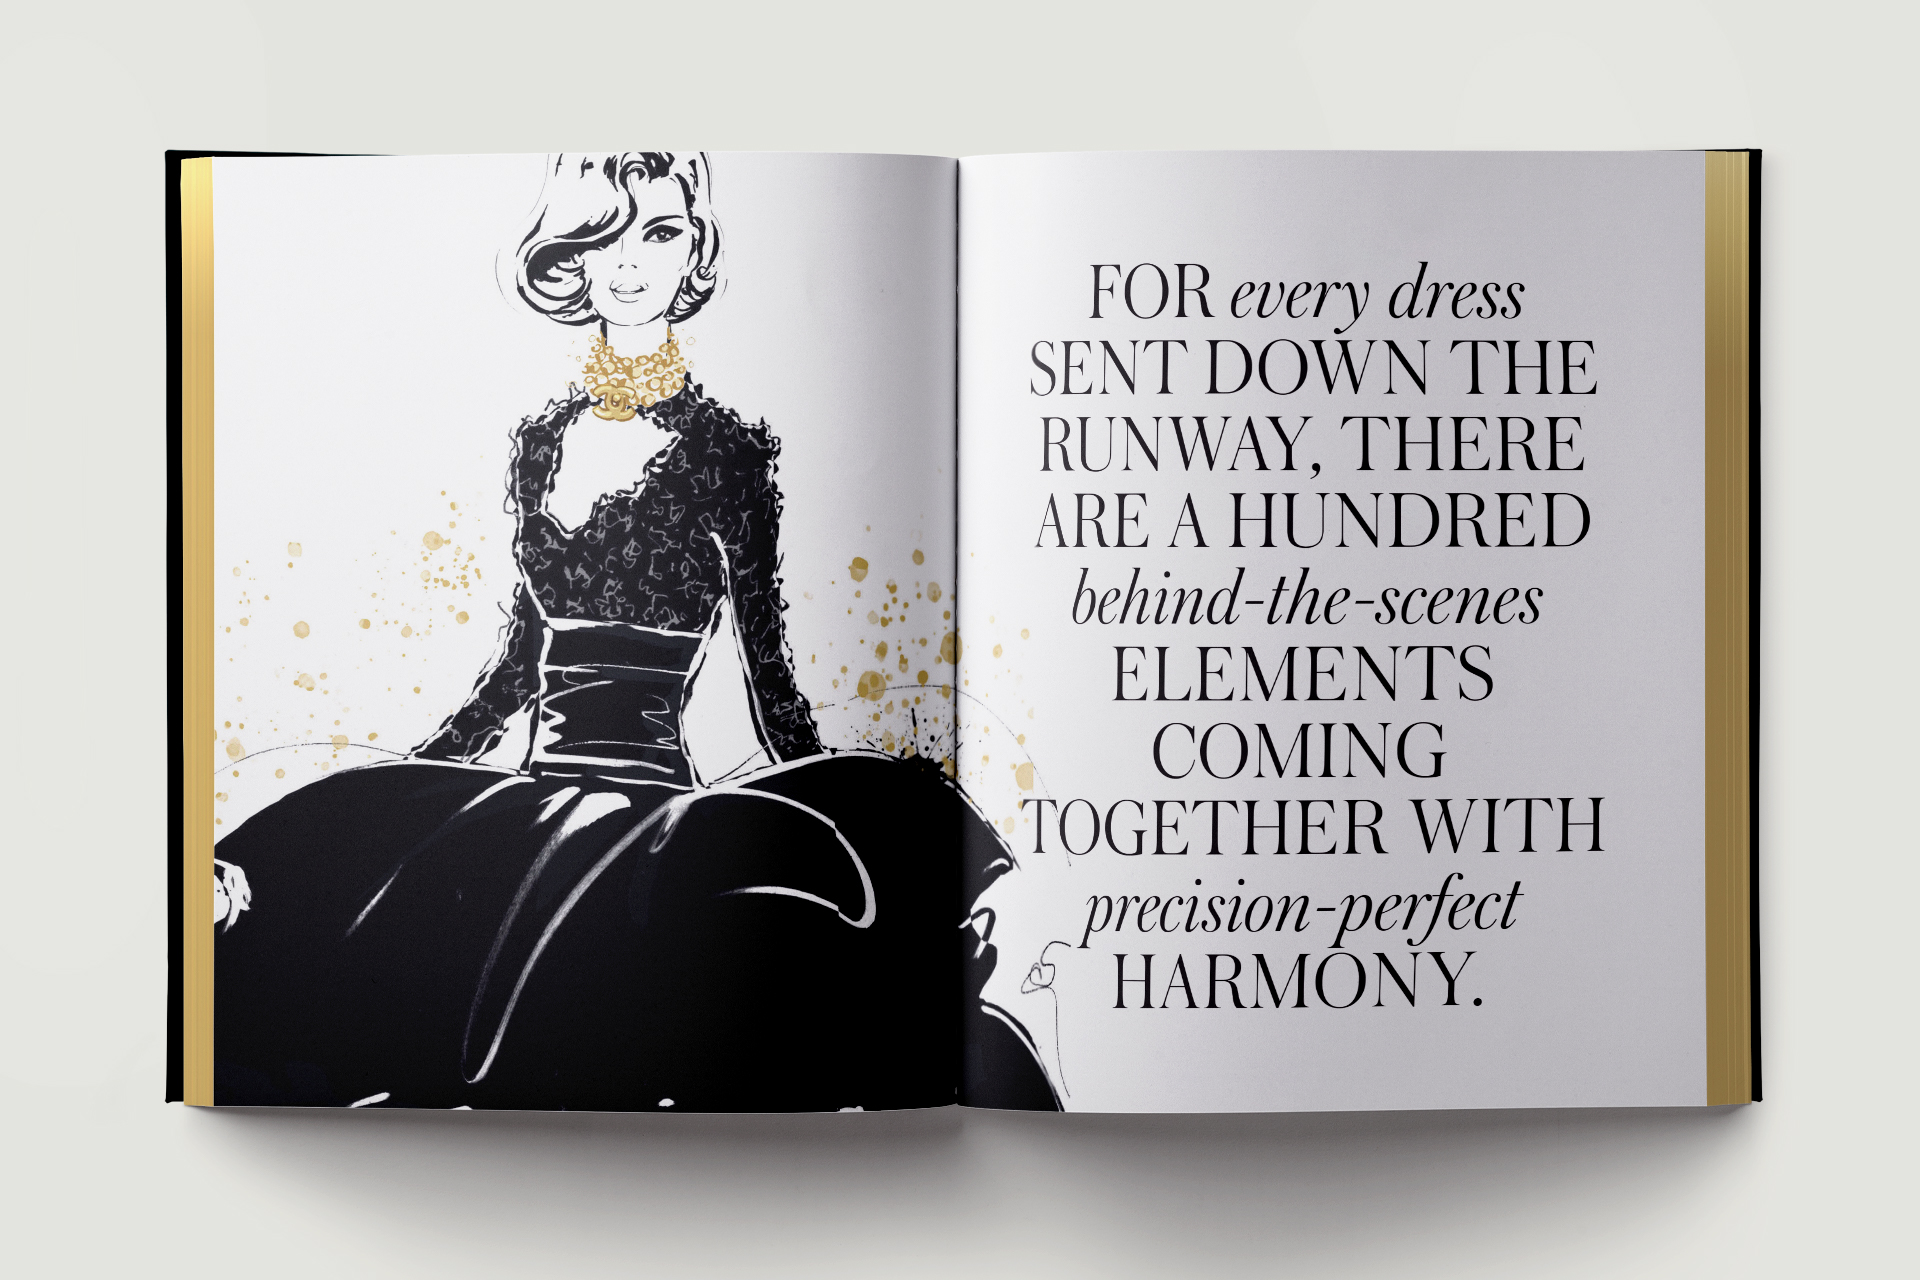 illustrated world of couture spreads 1